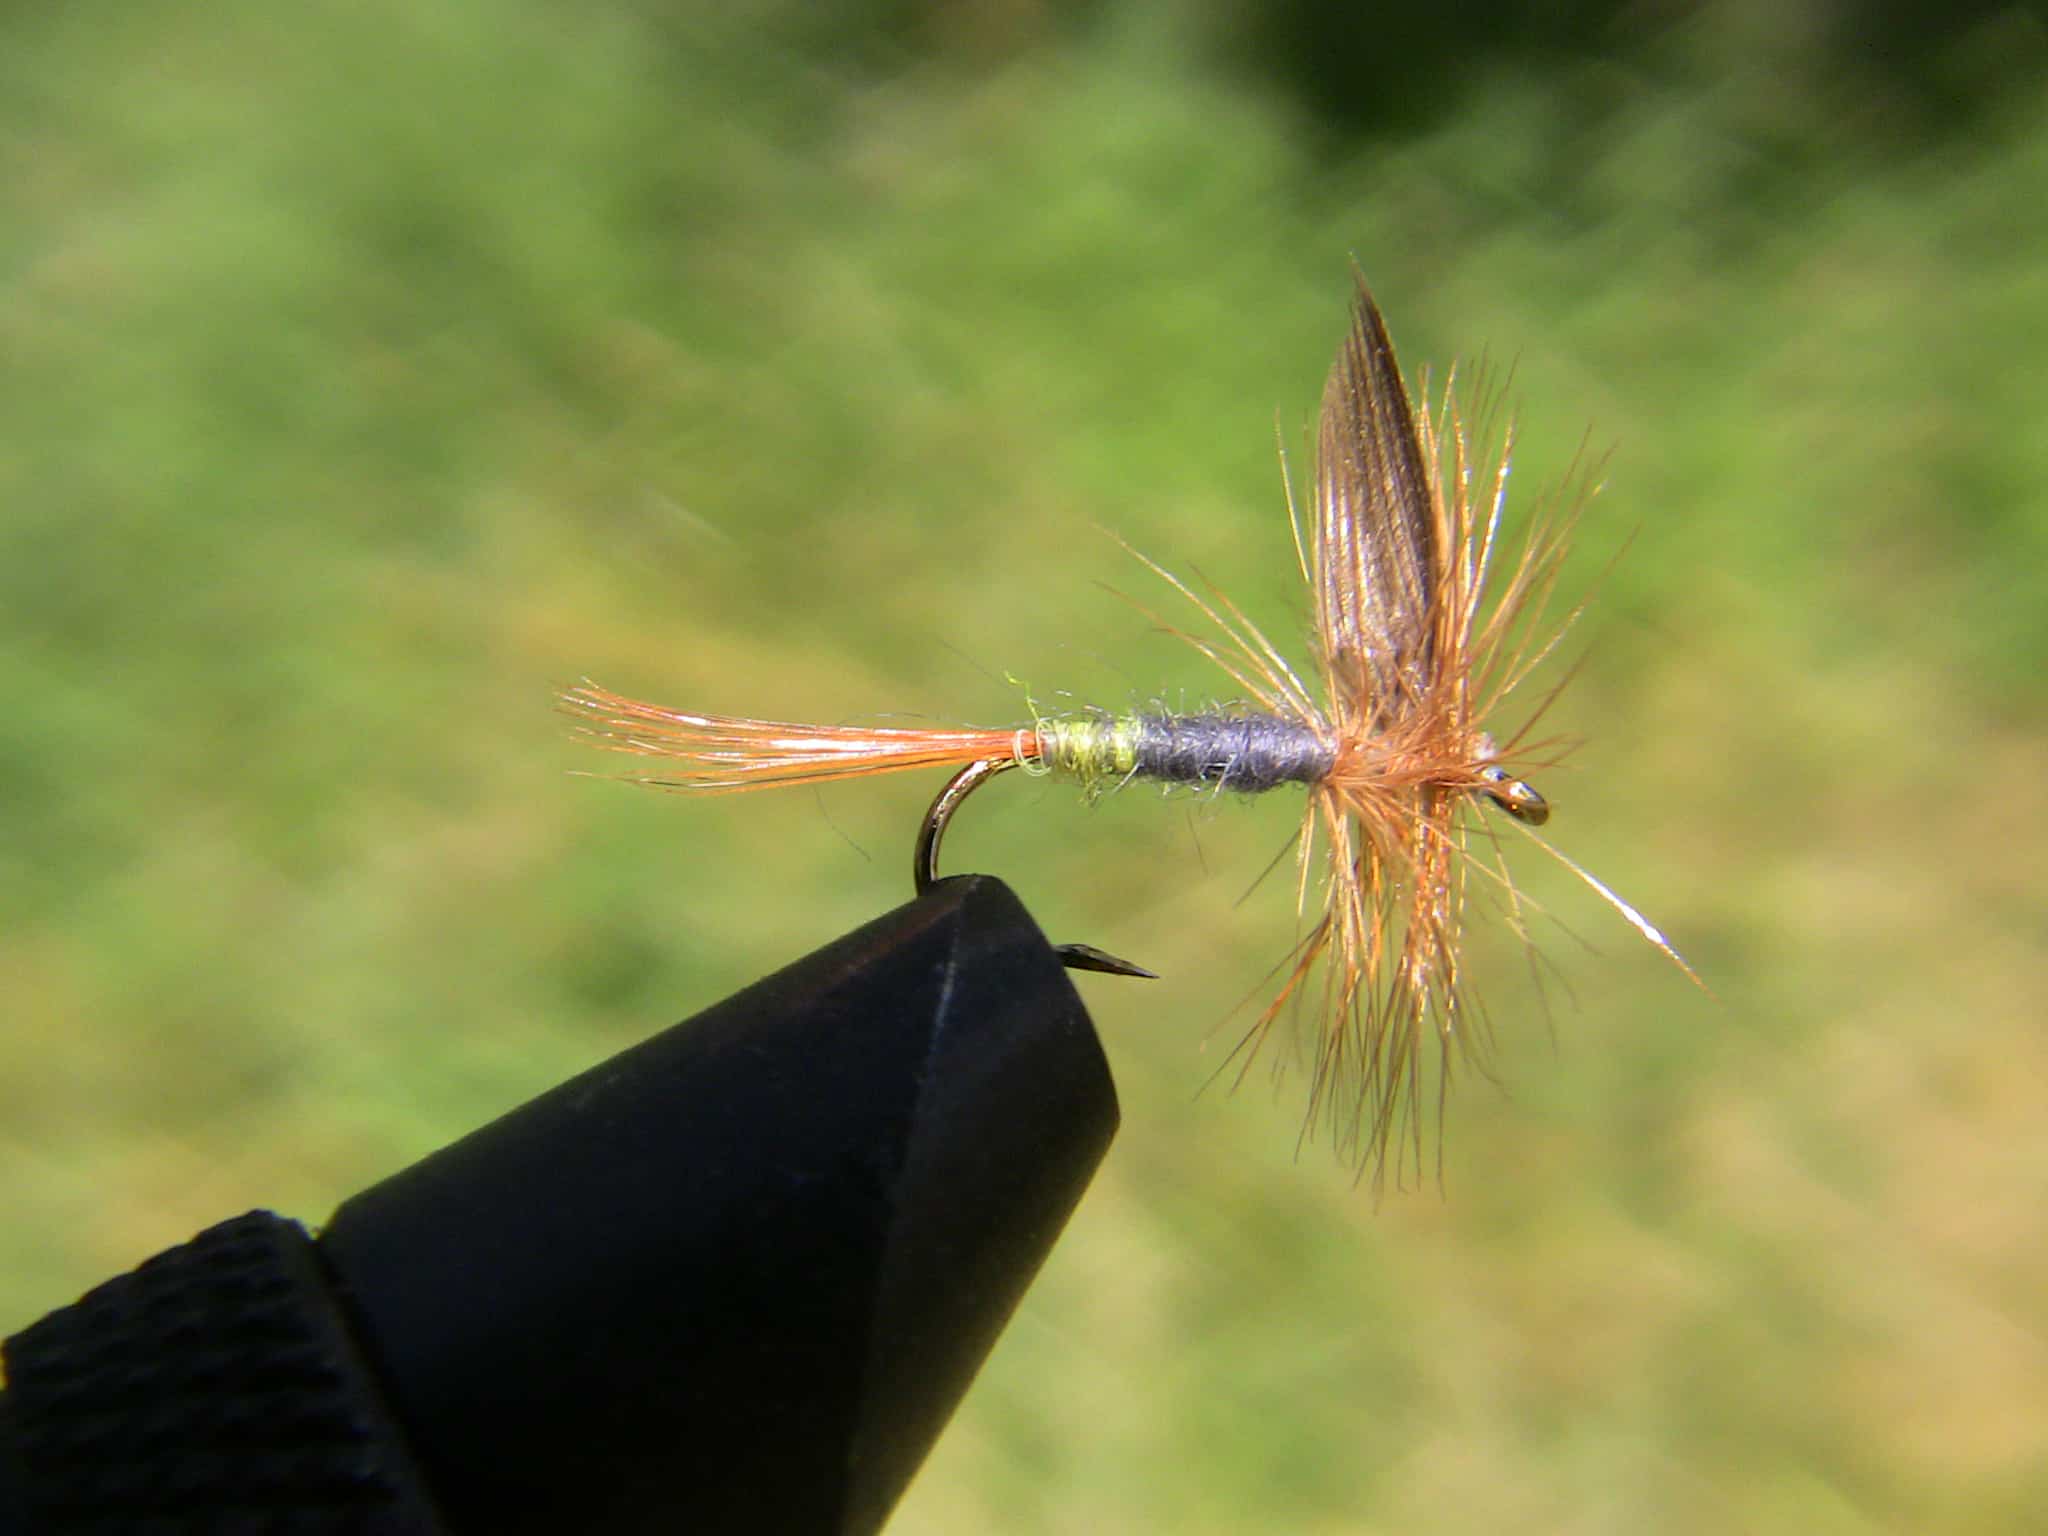 A profile view of the lady beaverkill fly, this image shows off the beauty of this productive fly.